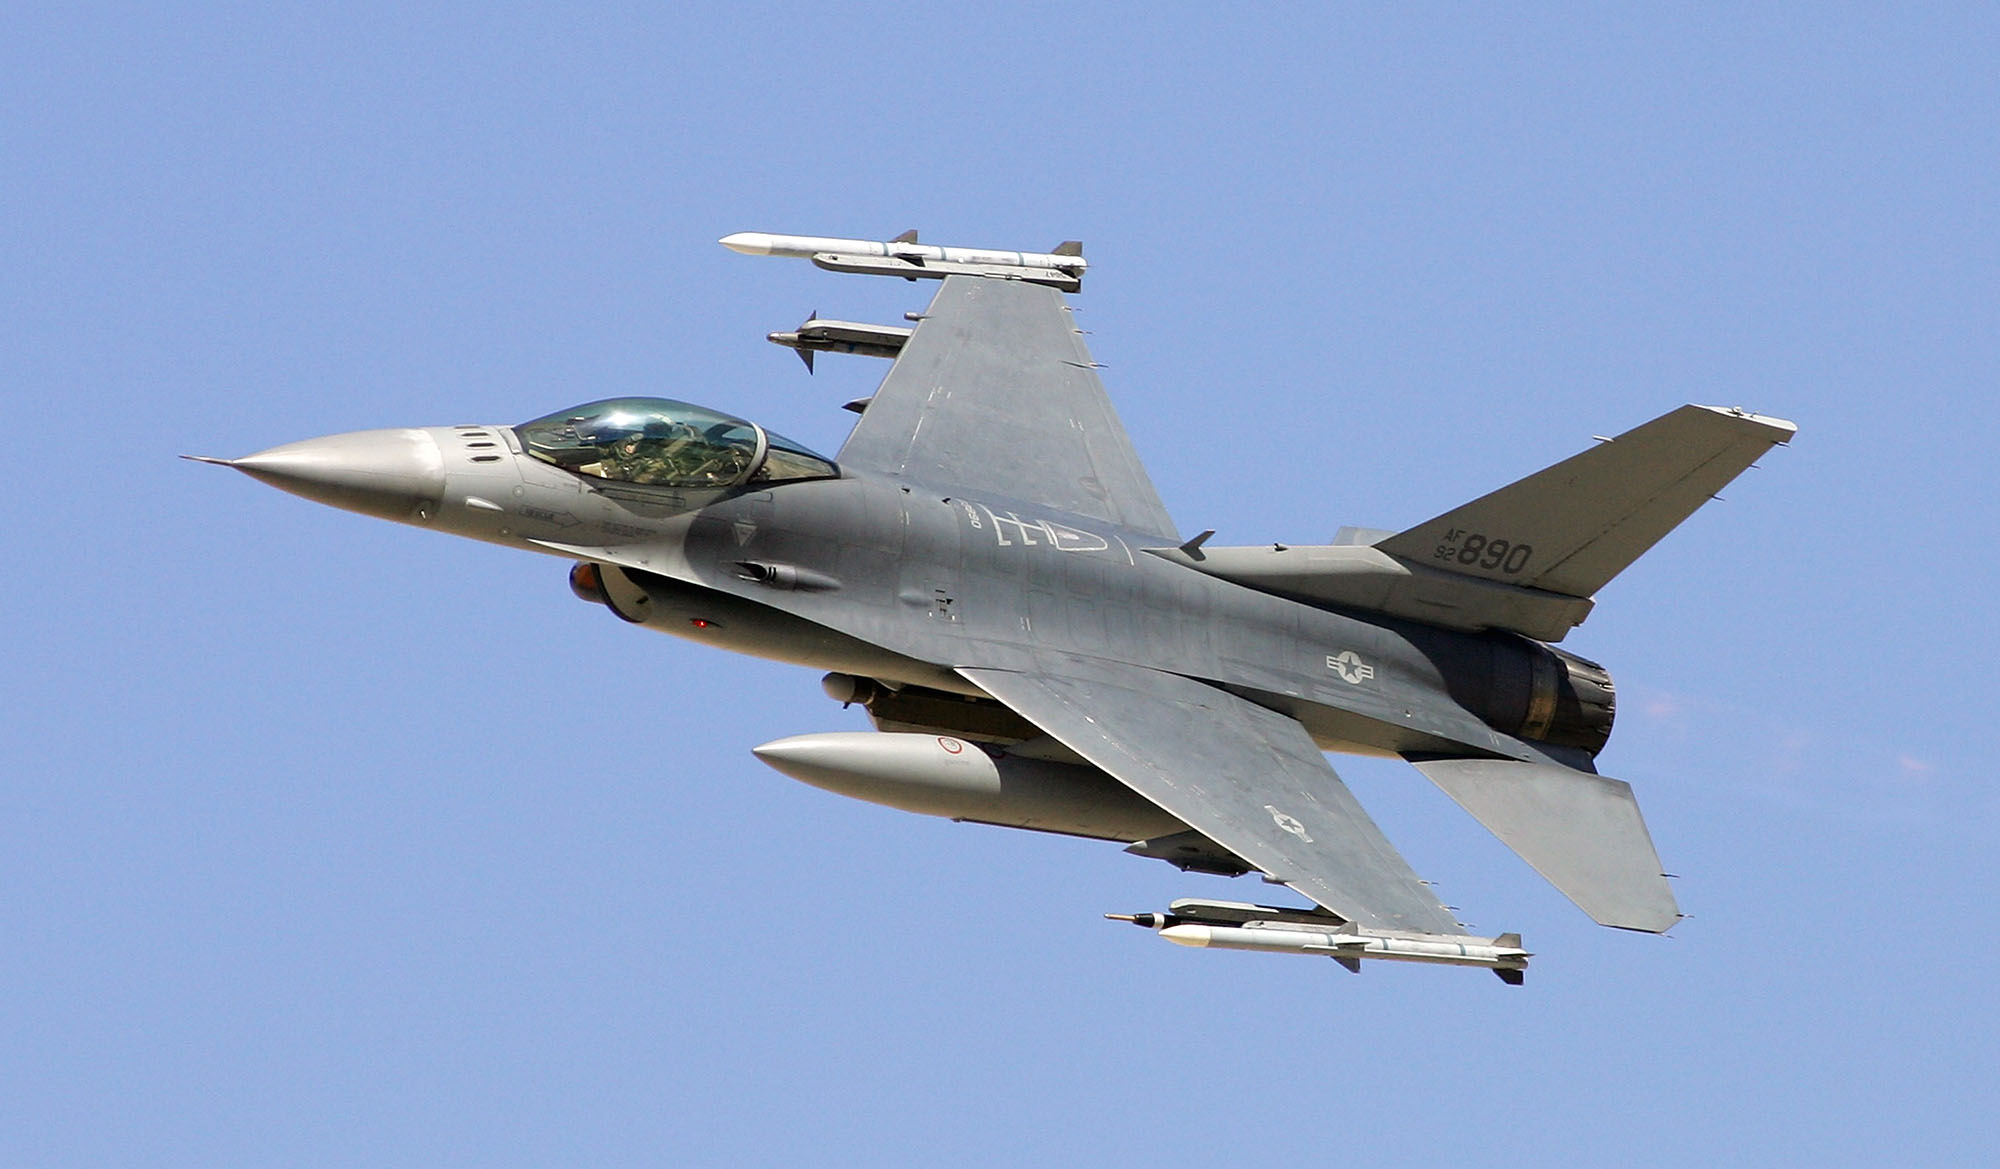 An F-16C Fighting Falcon flies by at the Nevada Test and Training Range September 14, 2007.